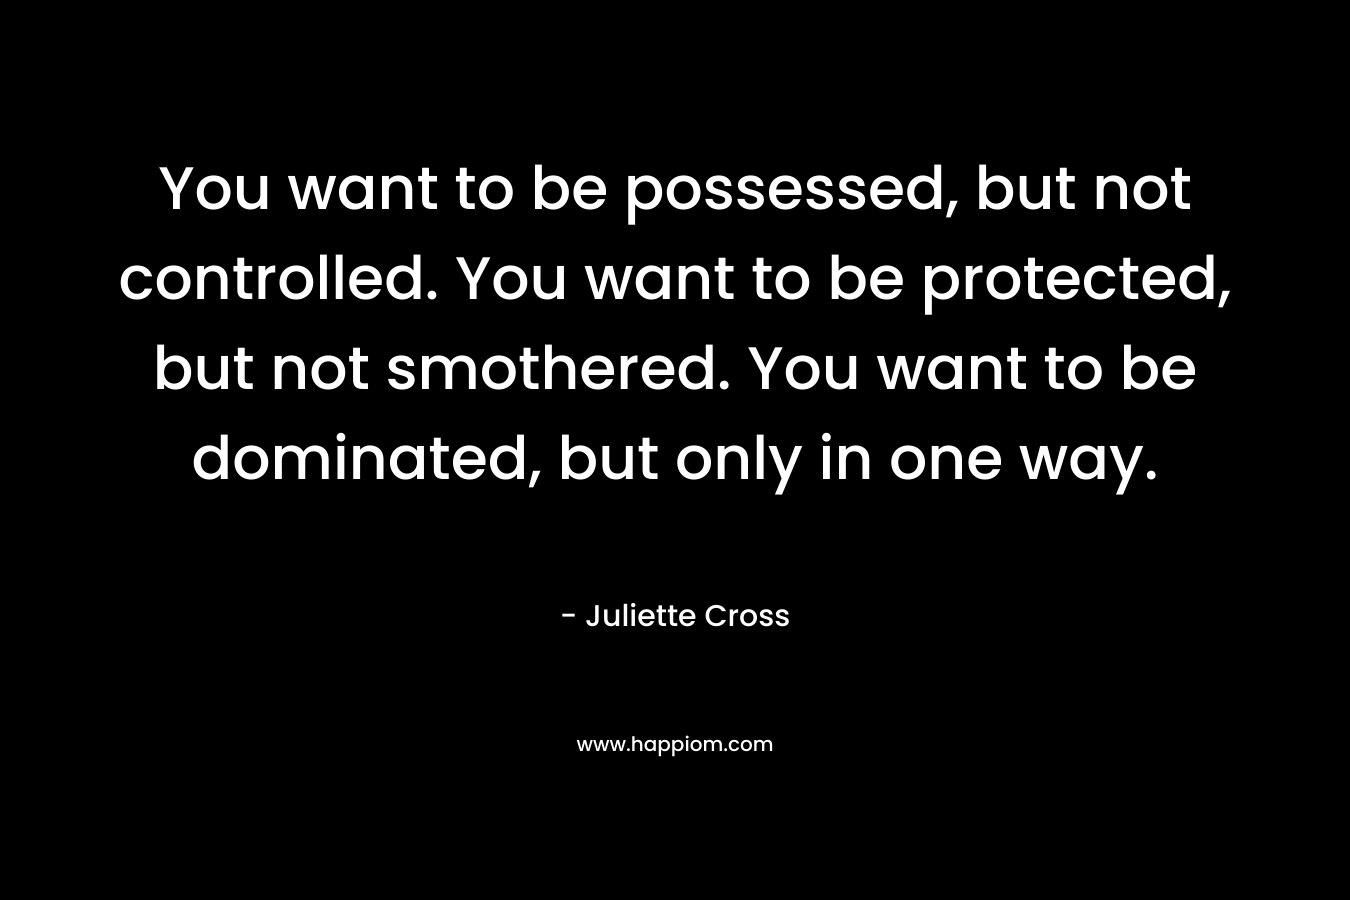 You want to be possessed, but not controlled. You want to be protected, but not smothered. You want to be dominated, but only in one way.